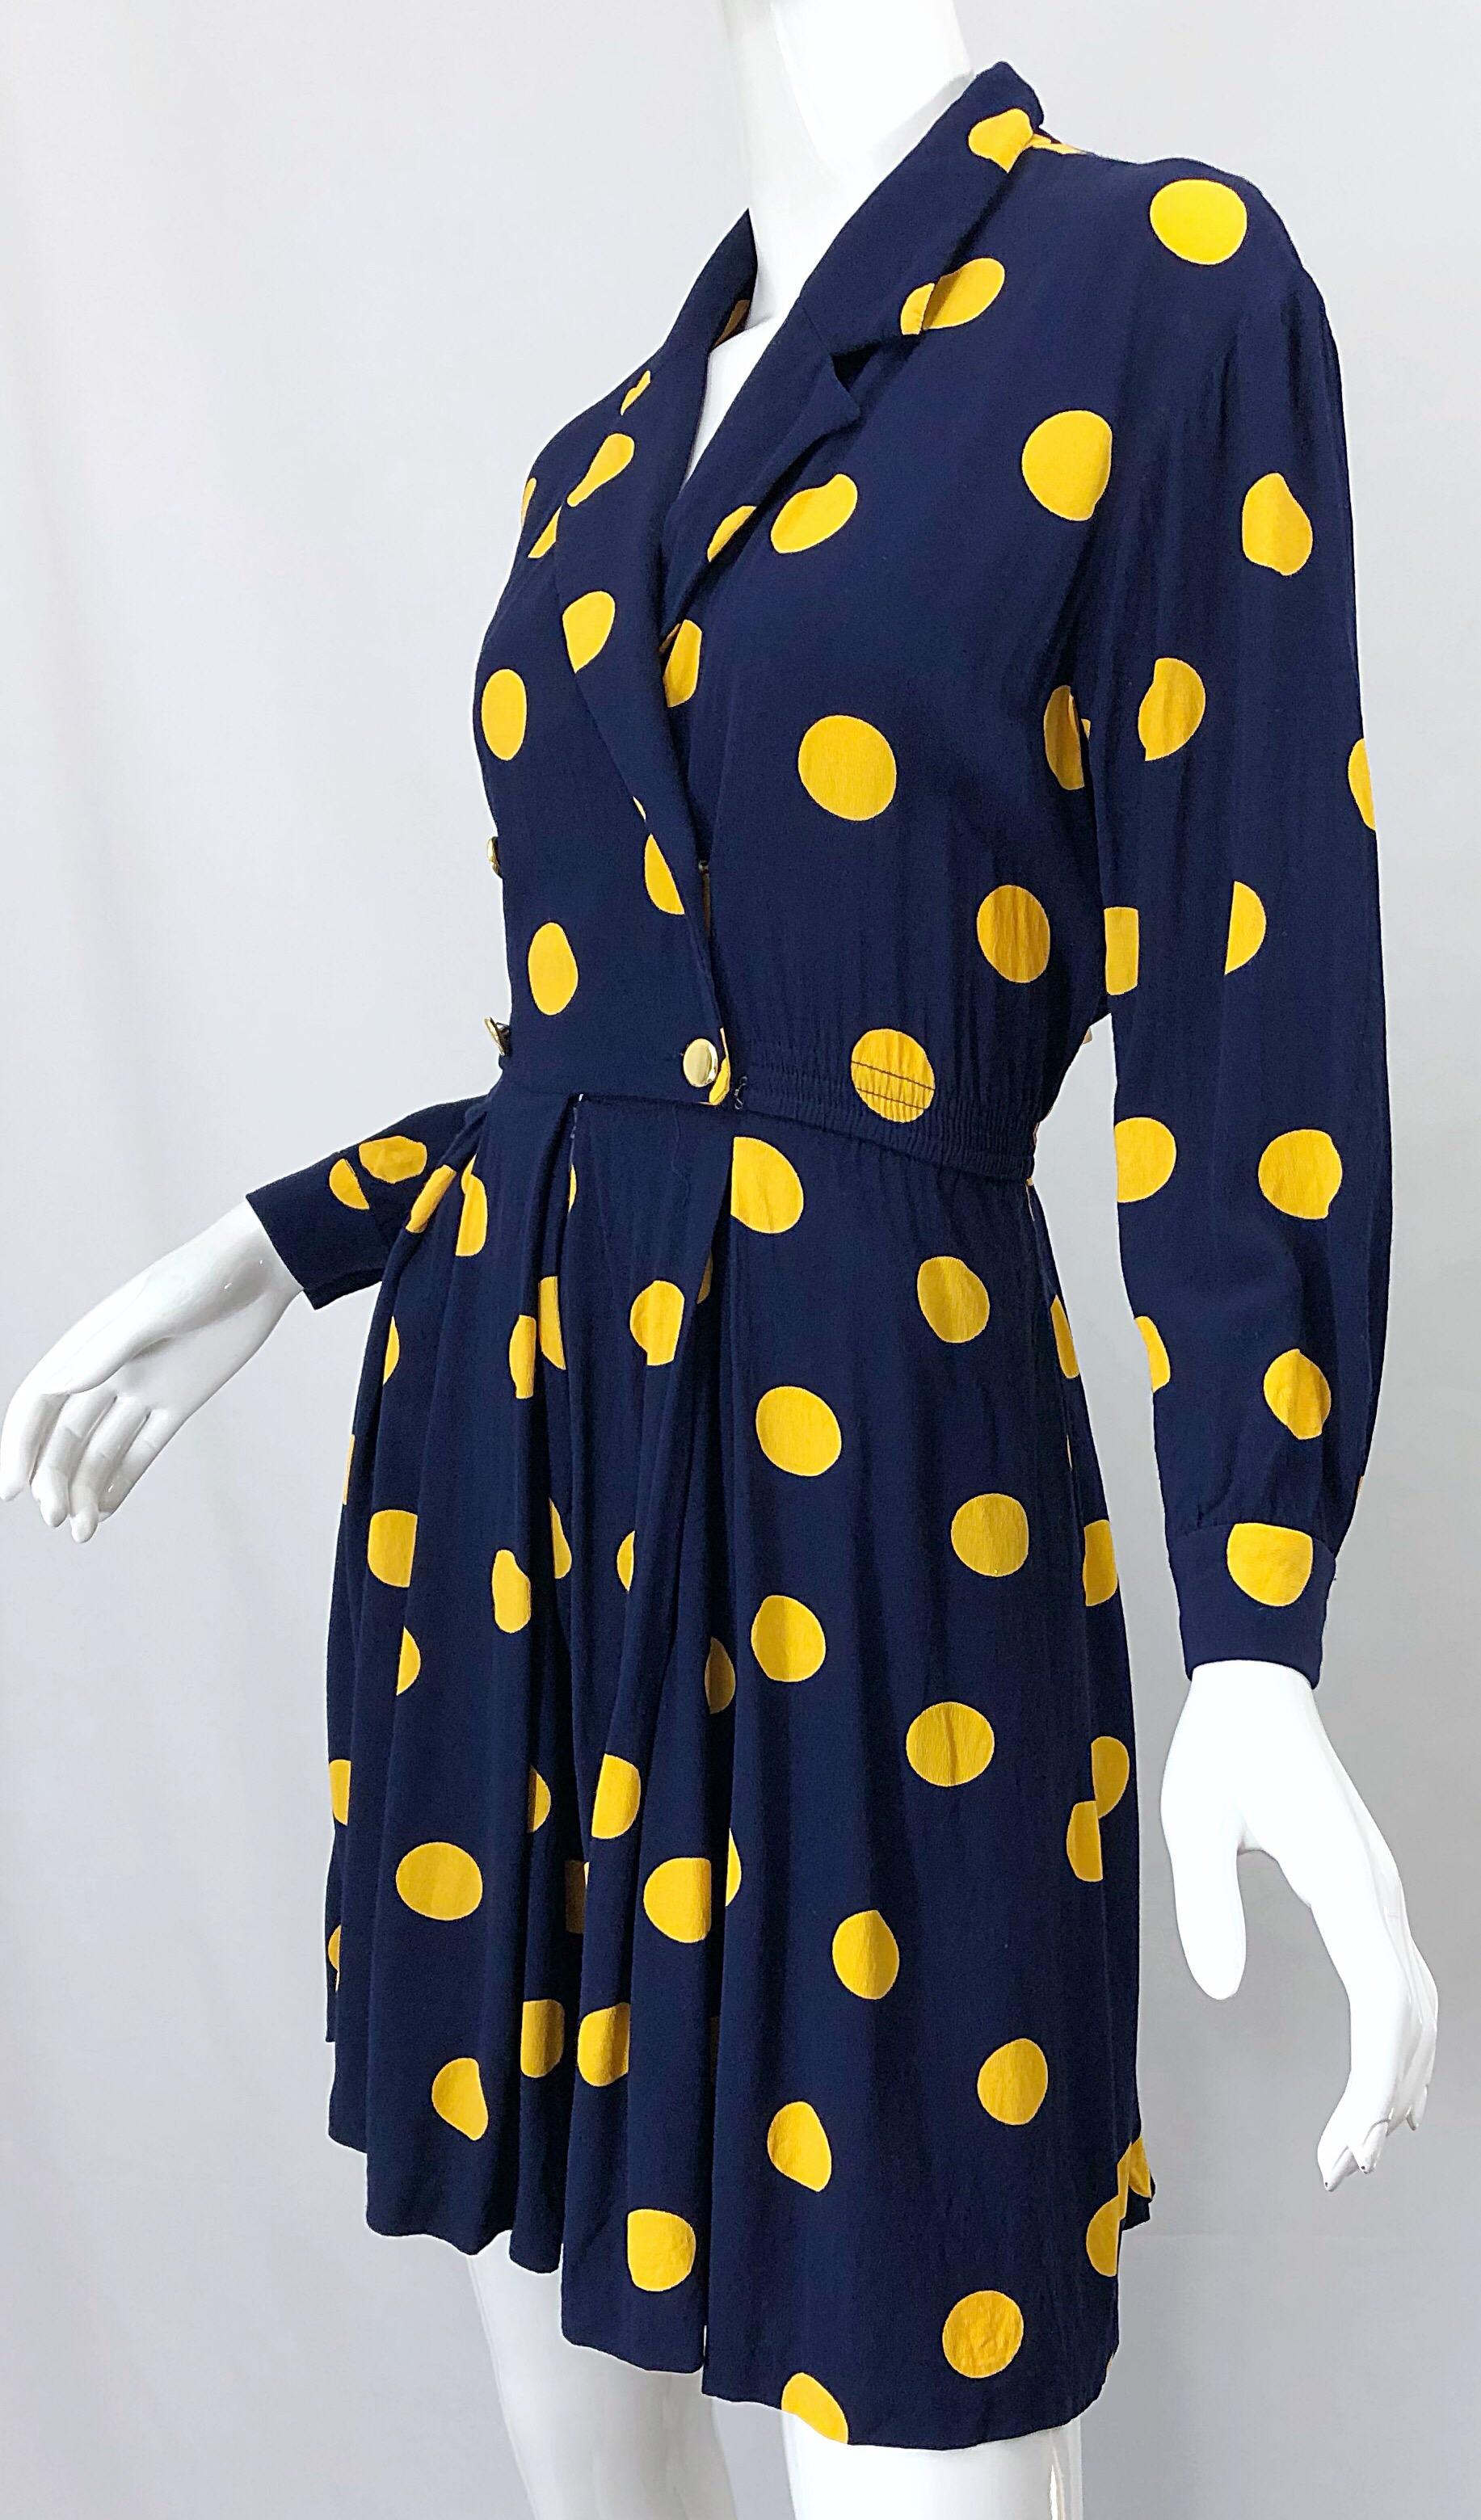 Size 8 Romper Late 1980s Navy Blue and Yellow Polka Dot 80s Vintage Romper 3